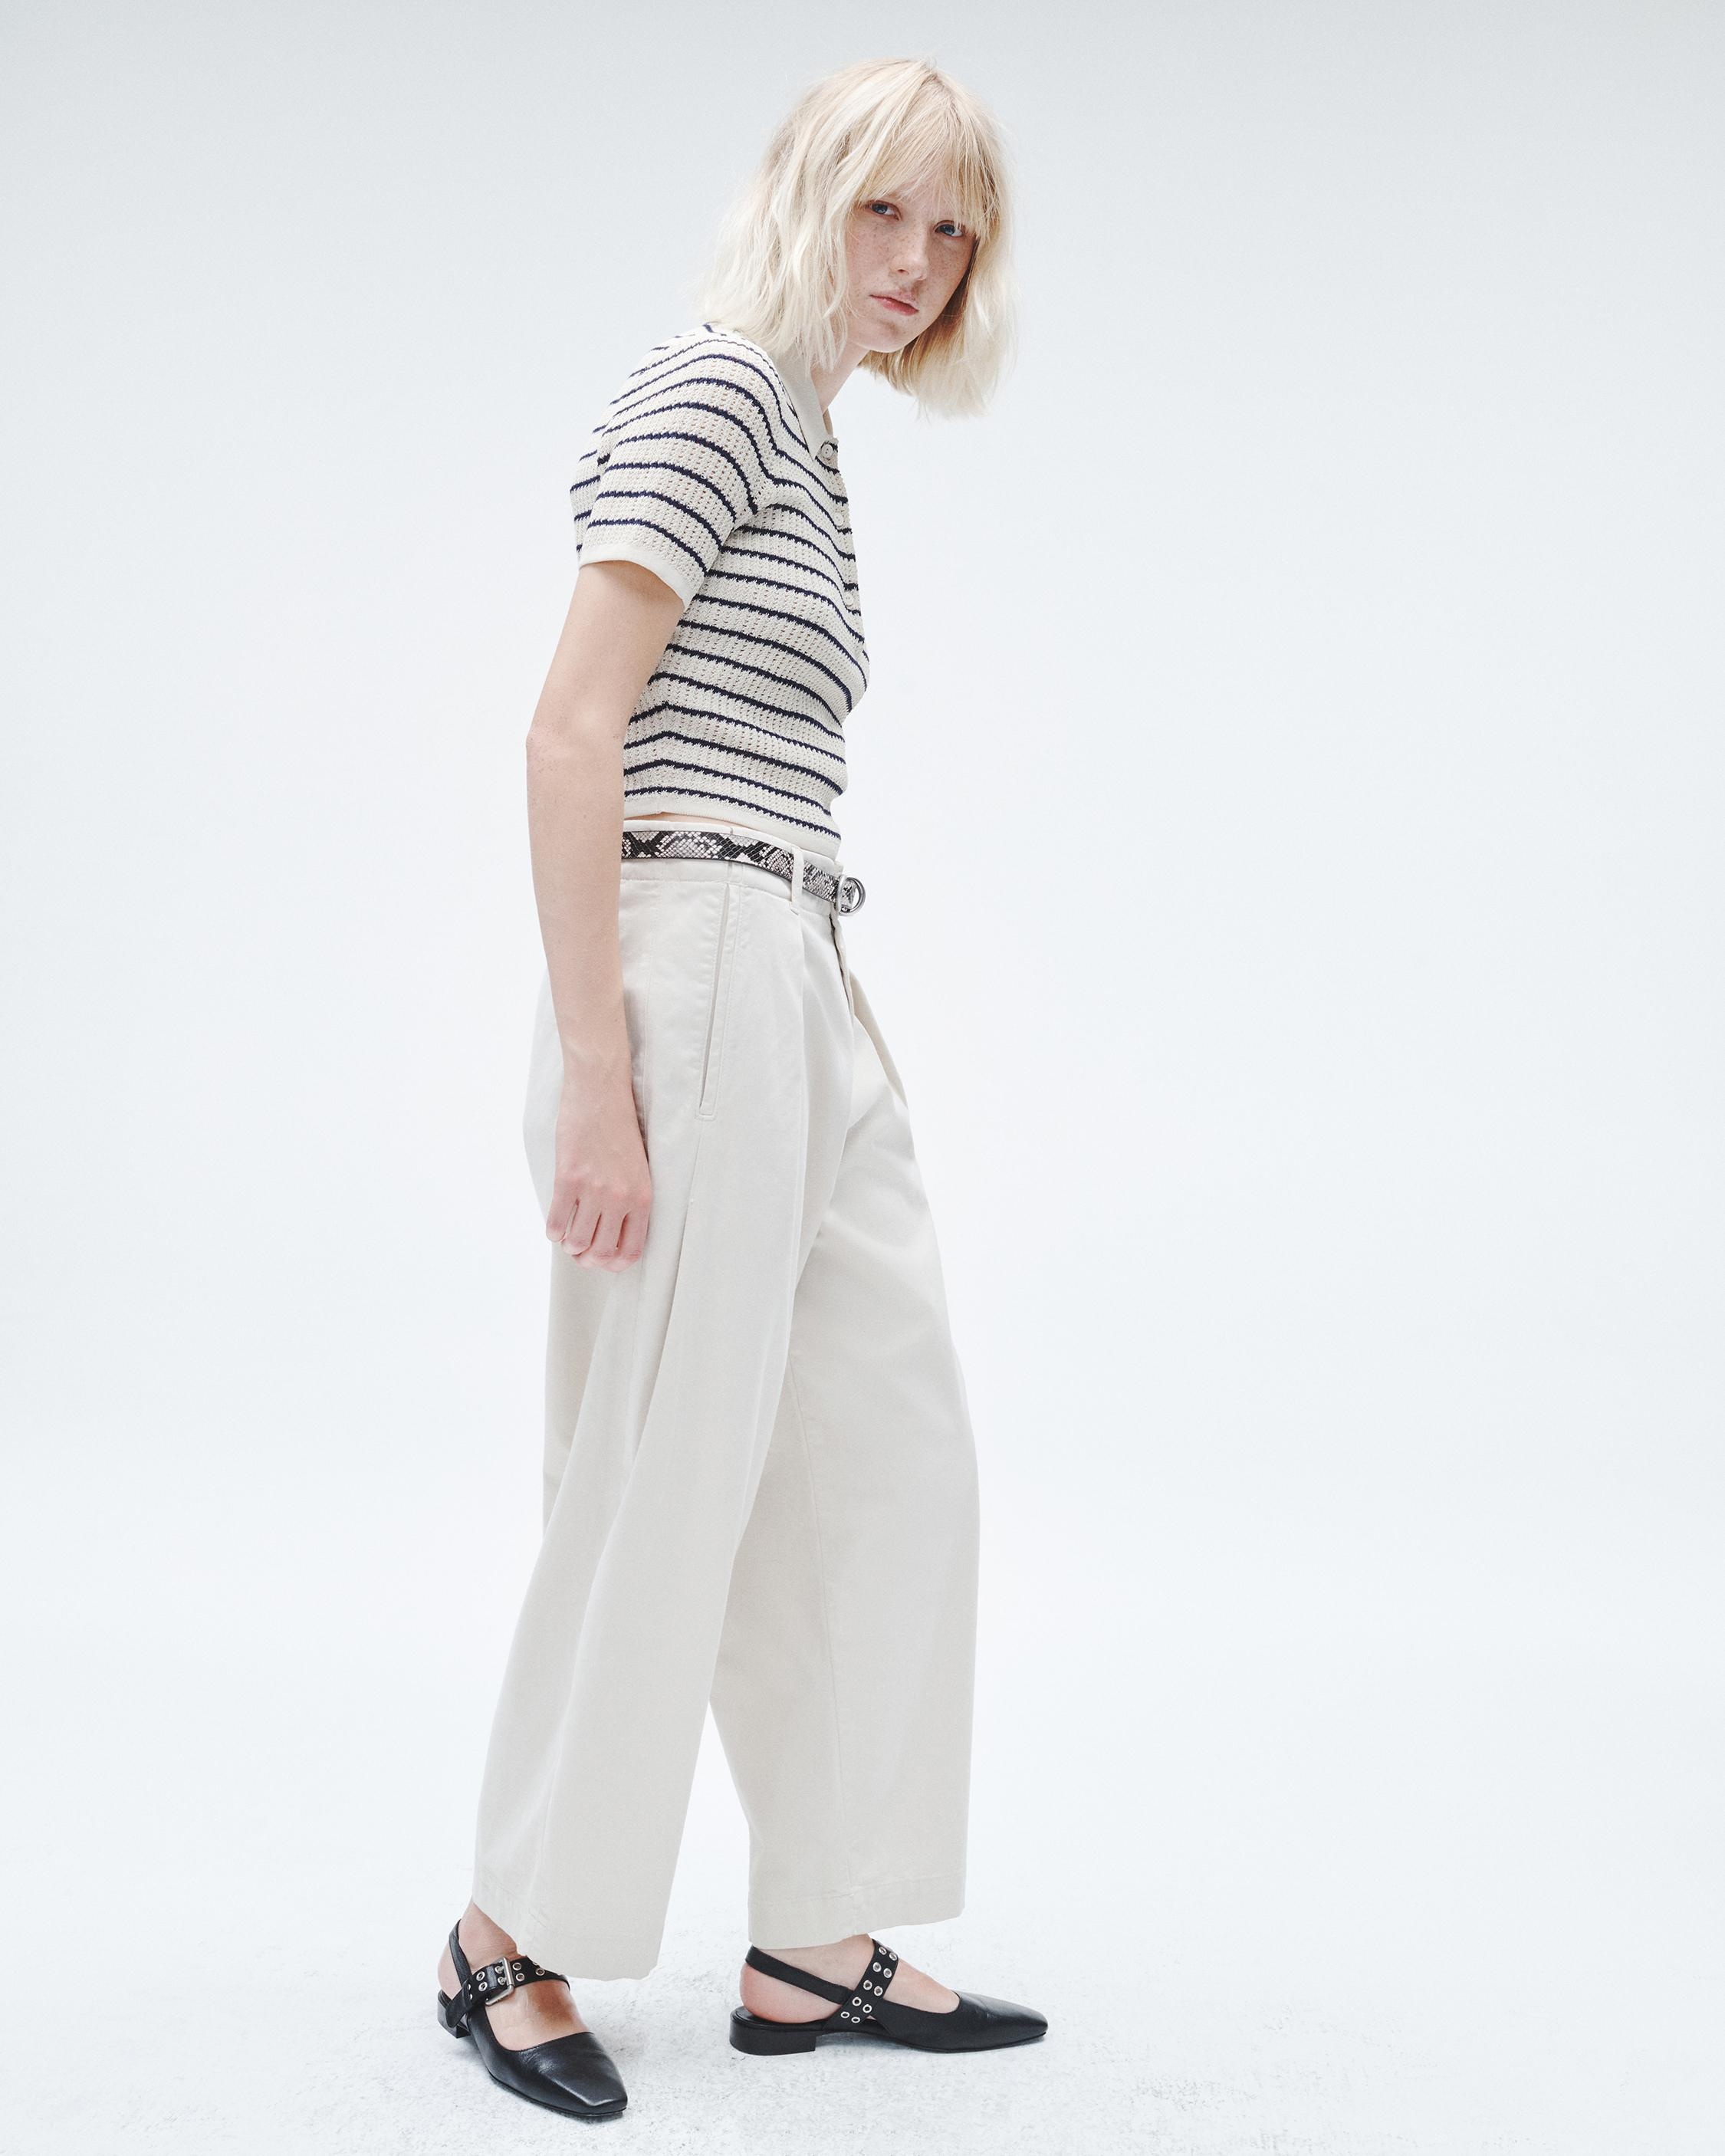 Donovan Cropped Cotton Pant
Relaxed Fit - 3